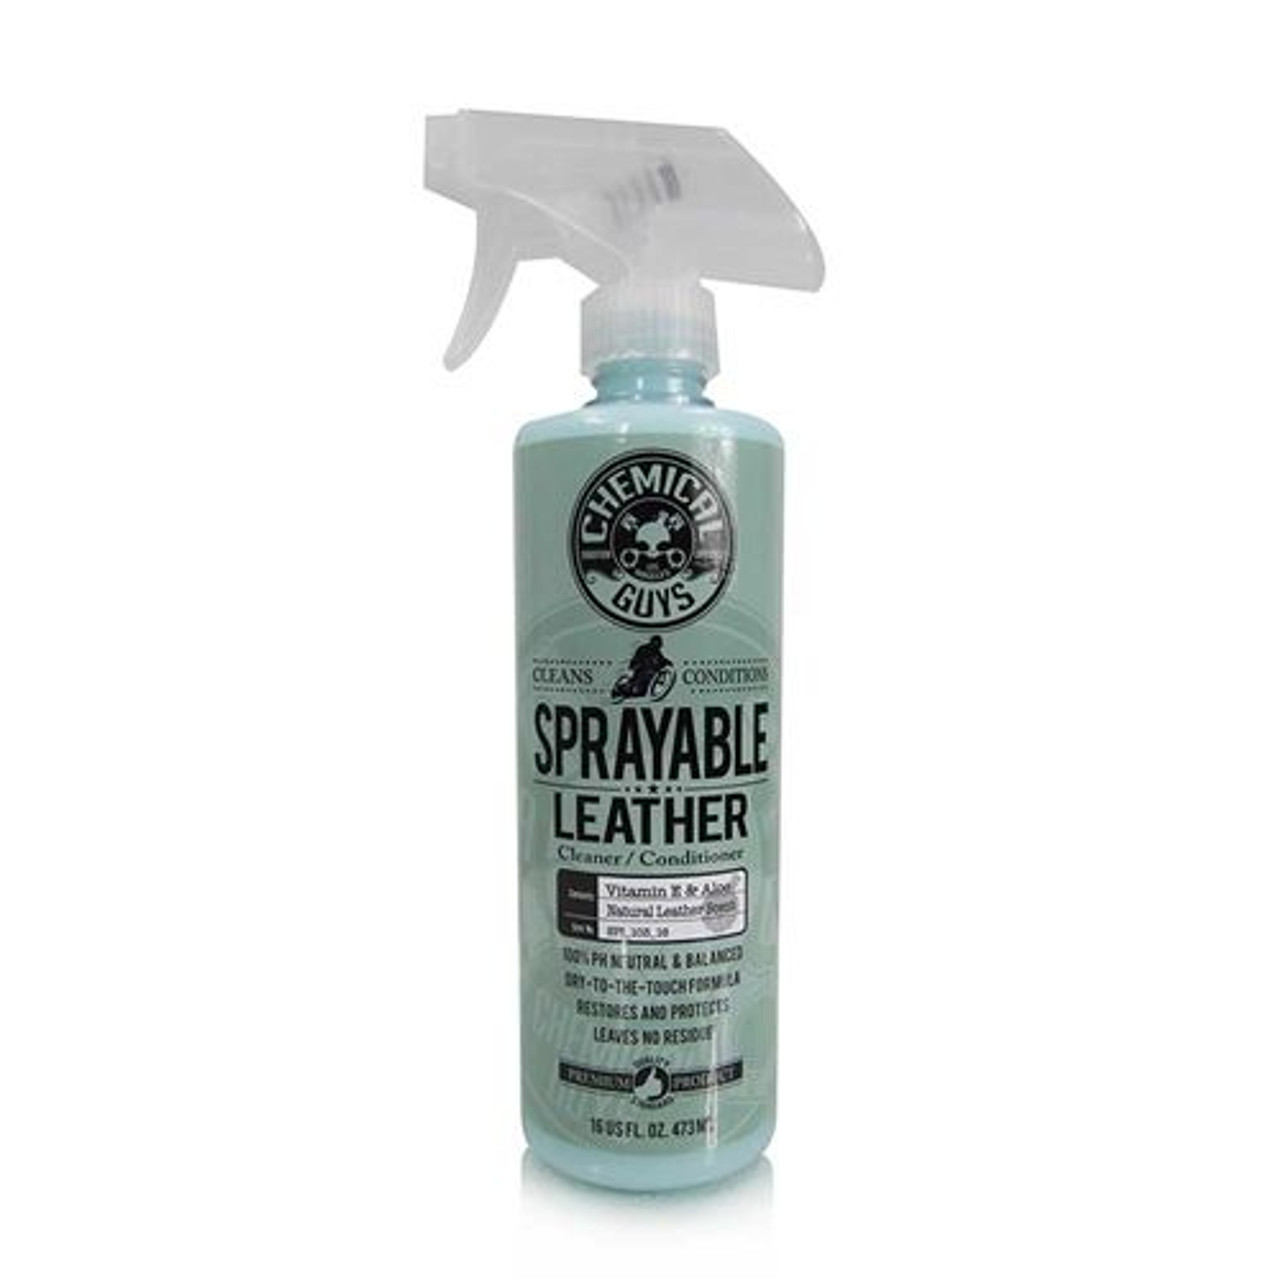 Chemical Guys Leather Scent Air Freshener 16oz + 2 Microfiber Towels